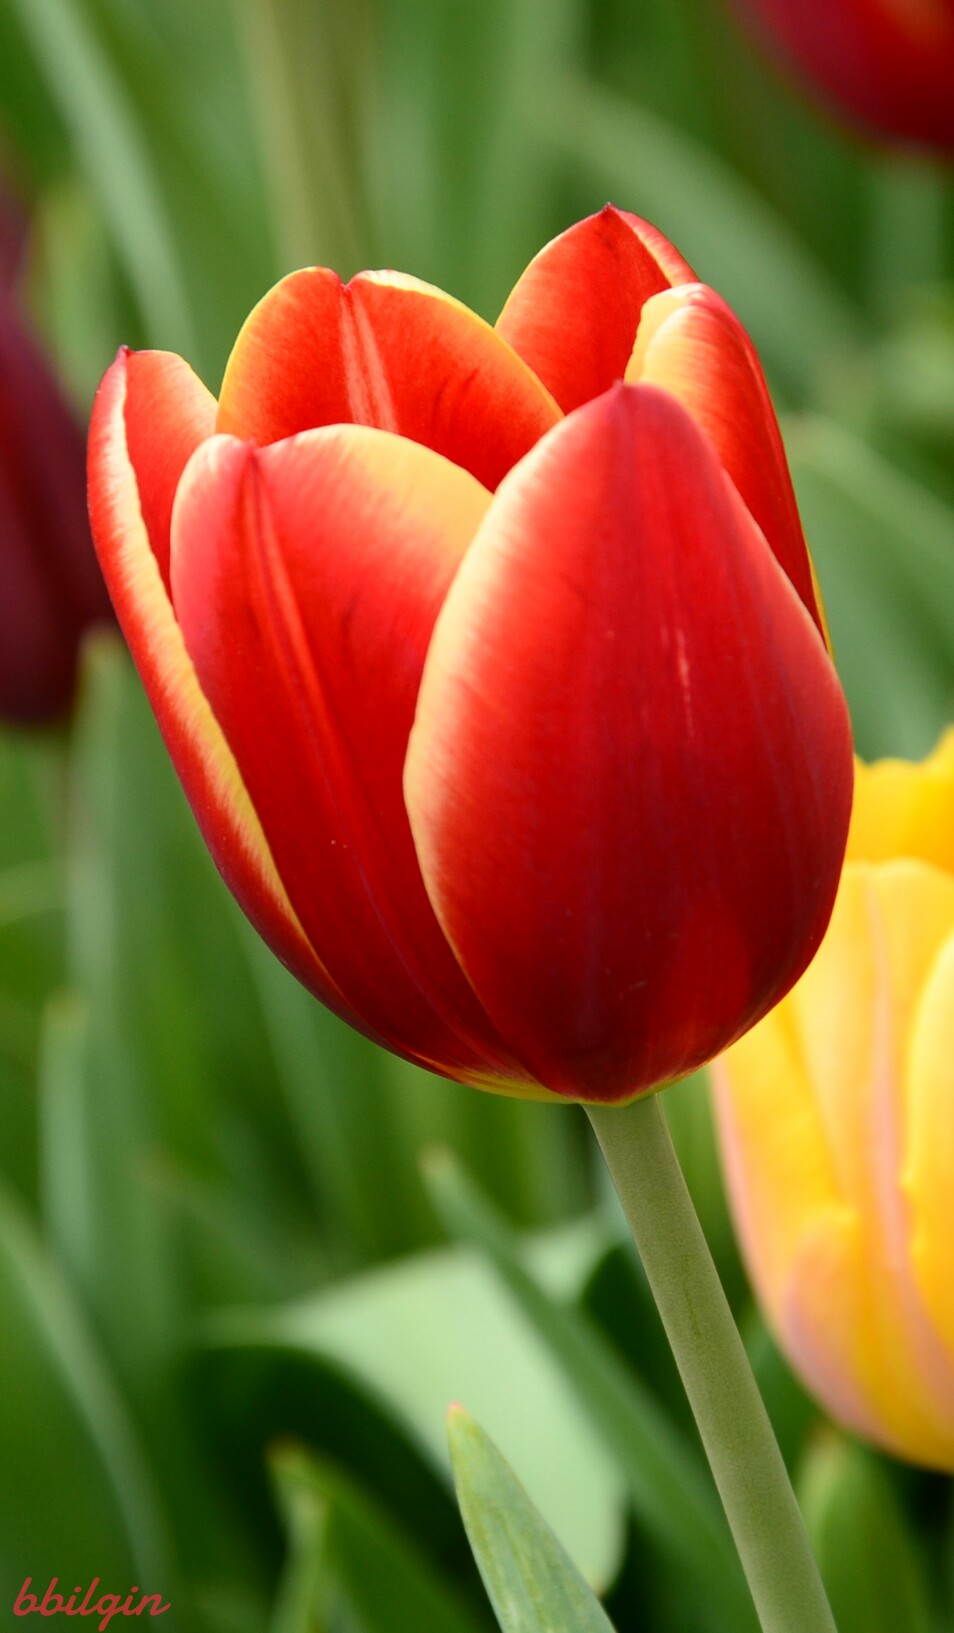 tulips blossom nature photography...